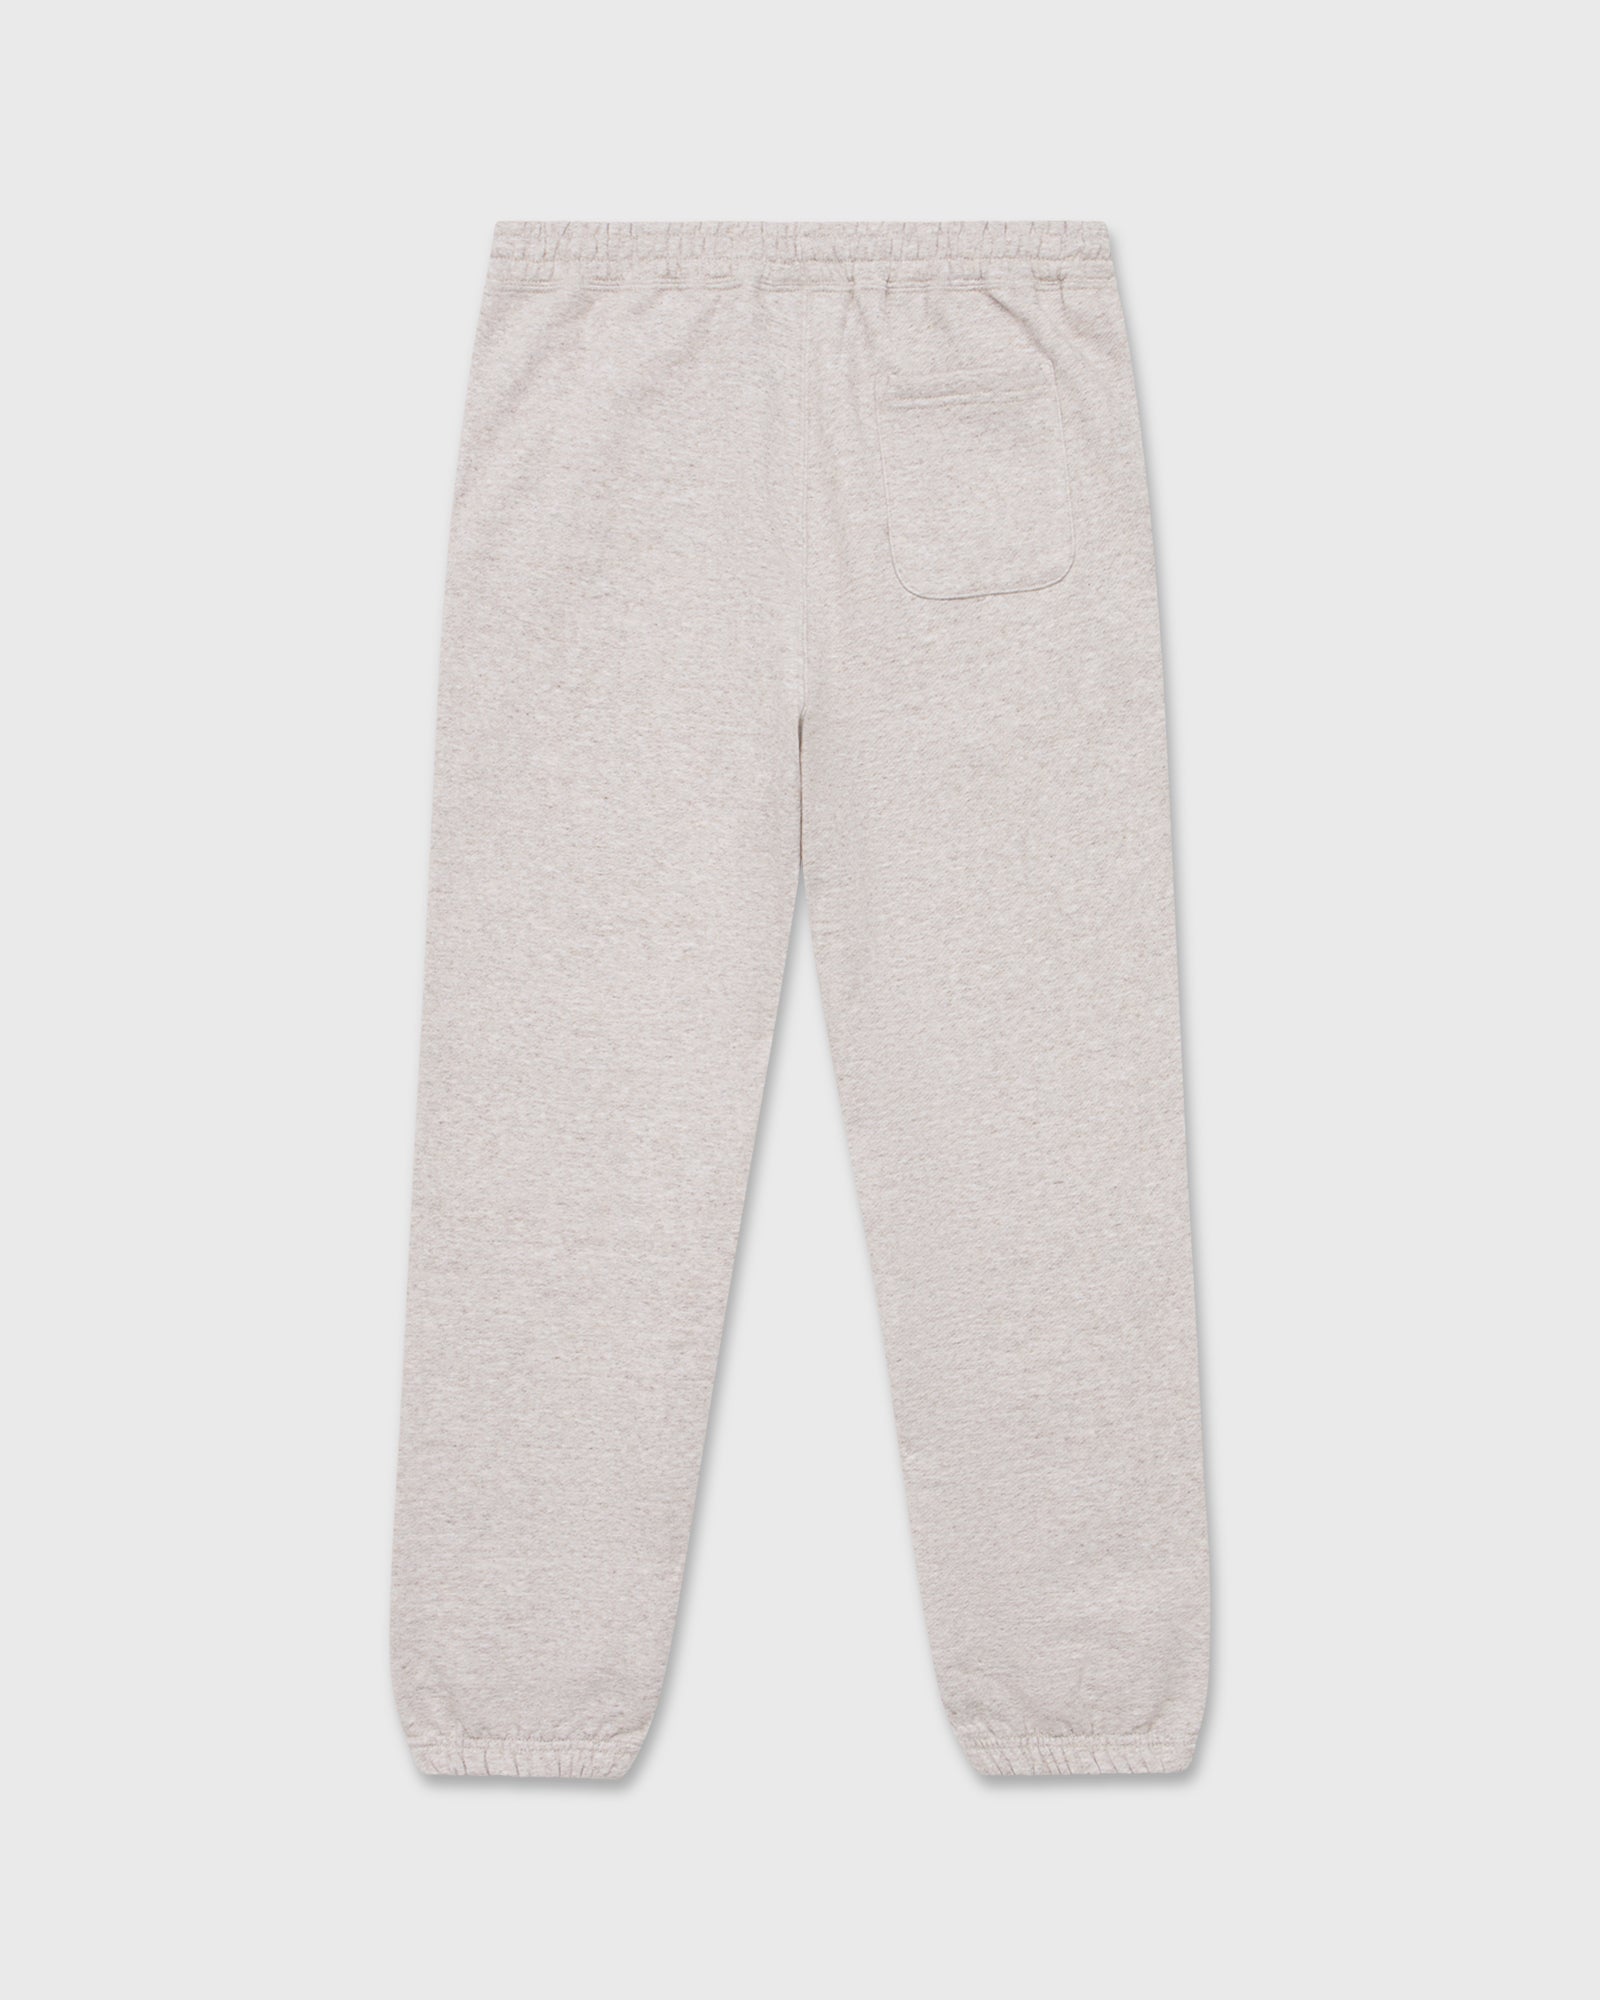 Speckle Fleece Relaxed Fit Sweatpant - Oatmeal